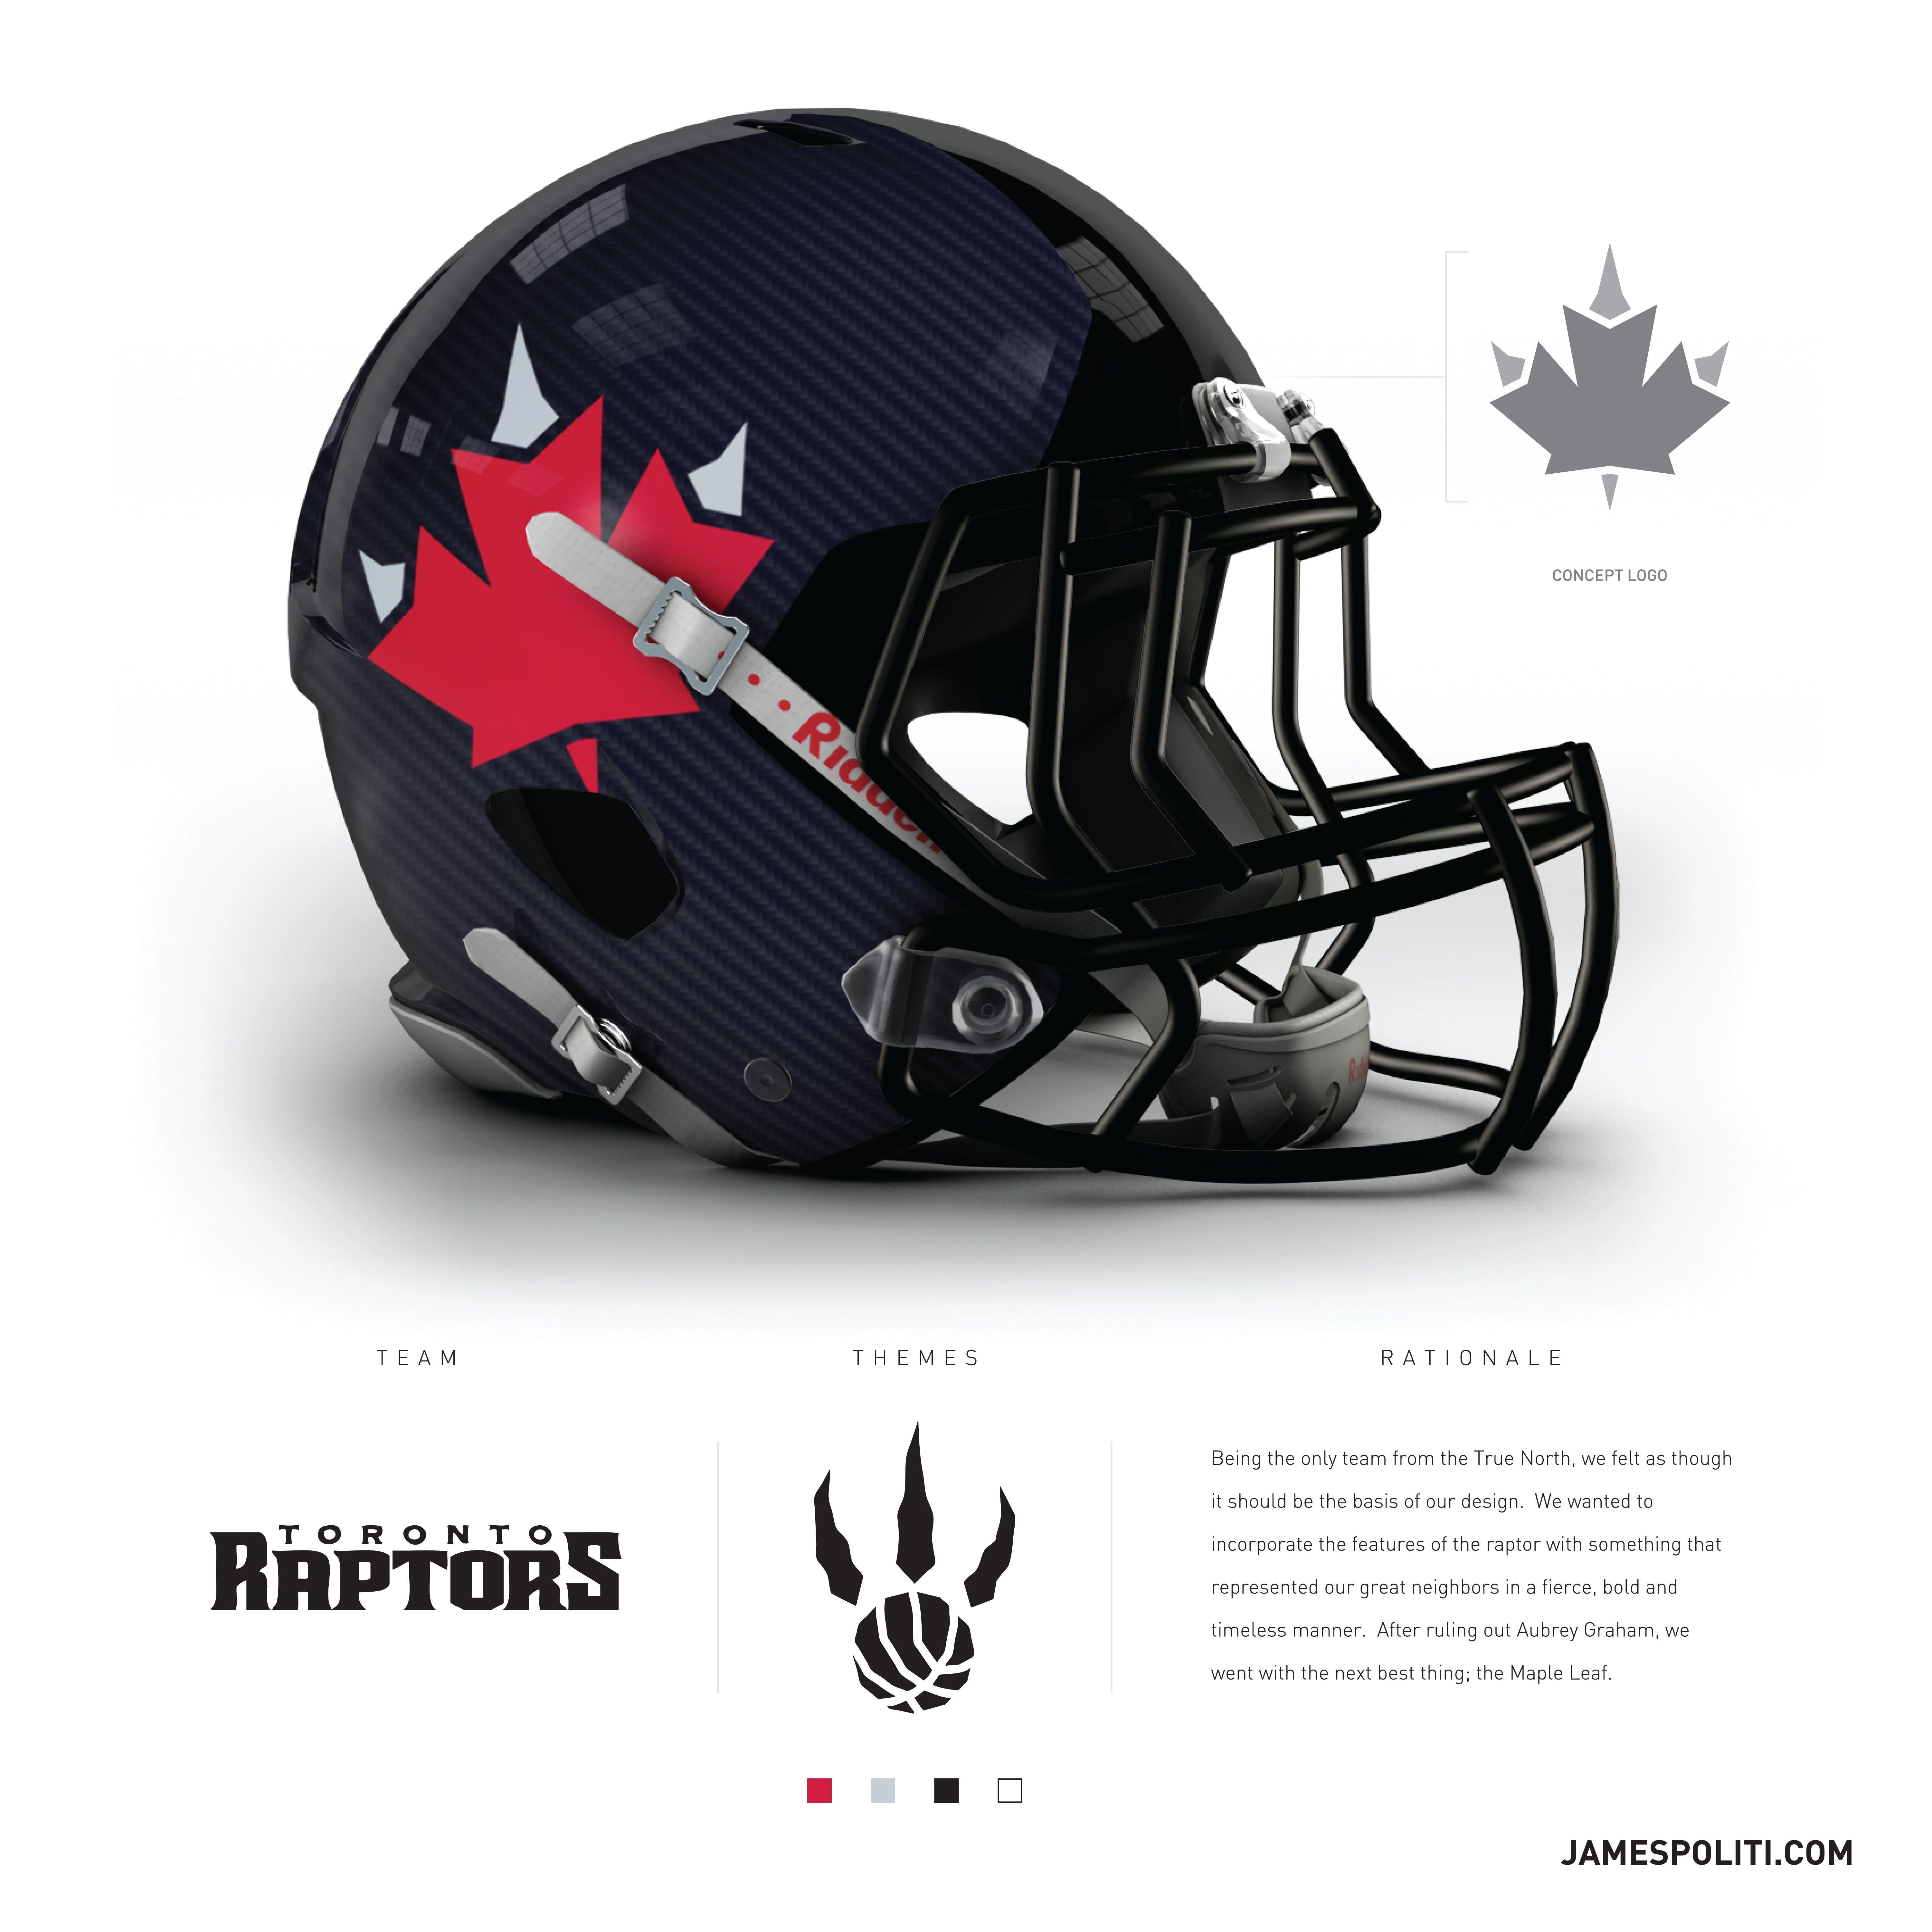 Cool Raptors Logo - Check out this cool Raptors logo concept in this graphic designer's